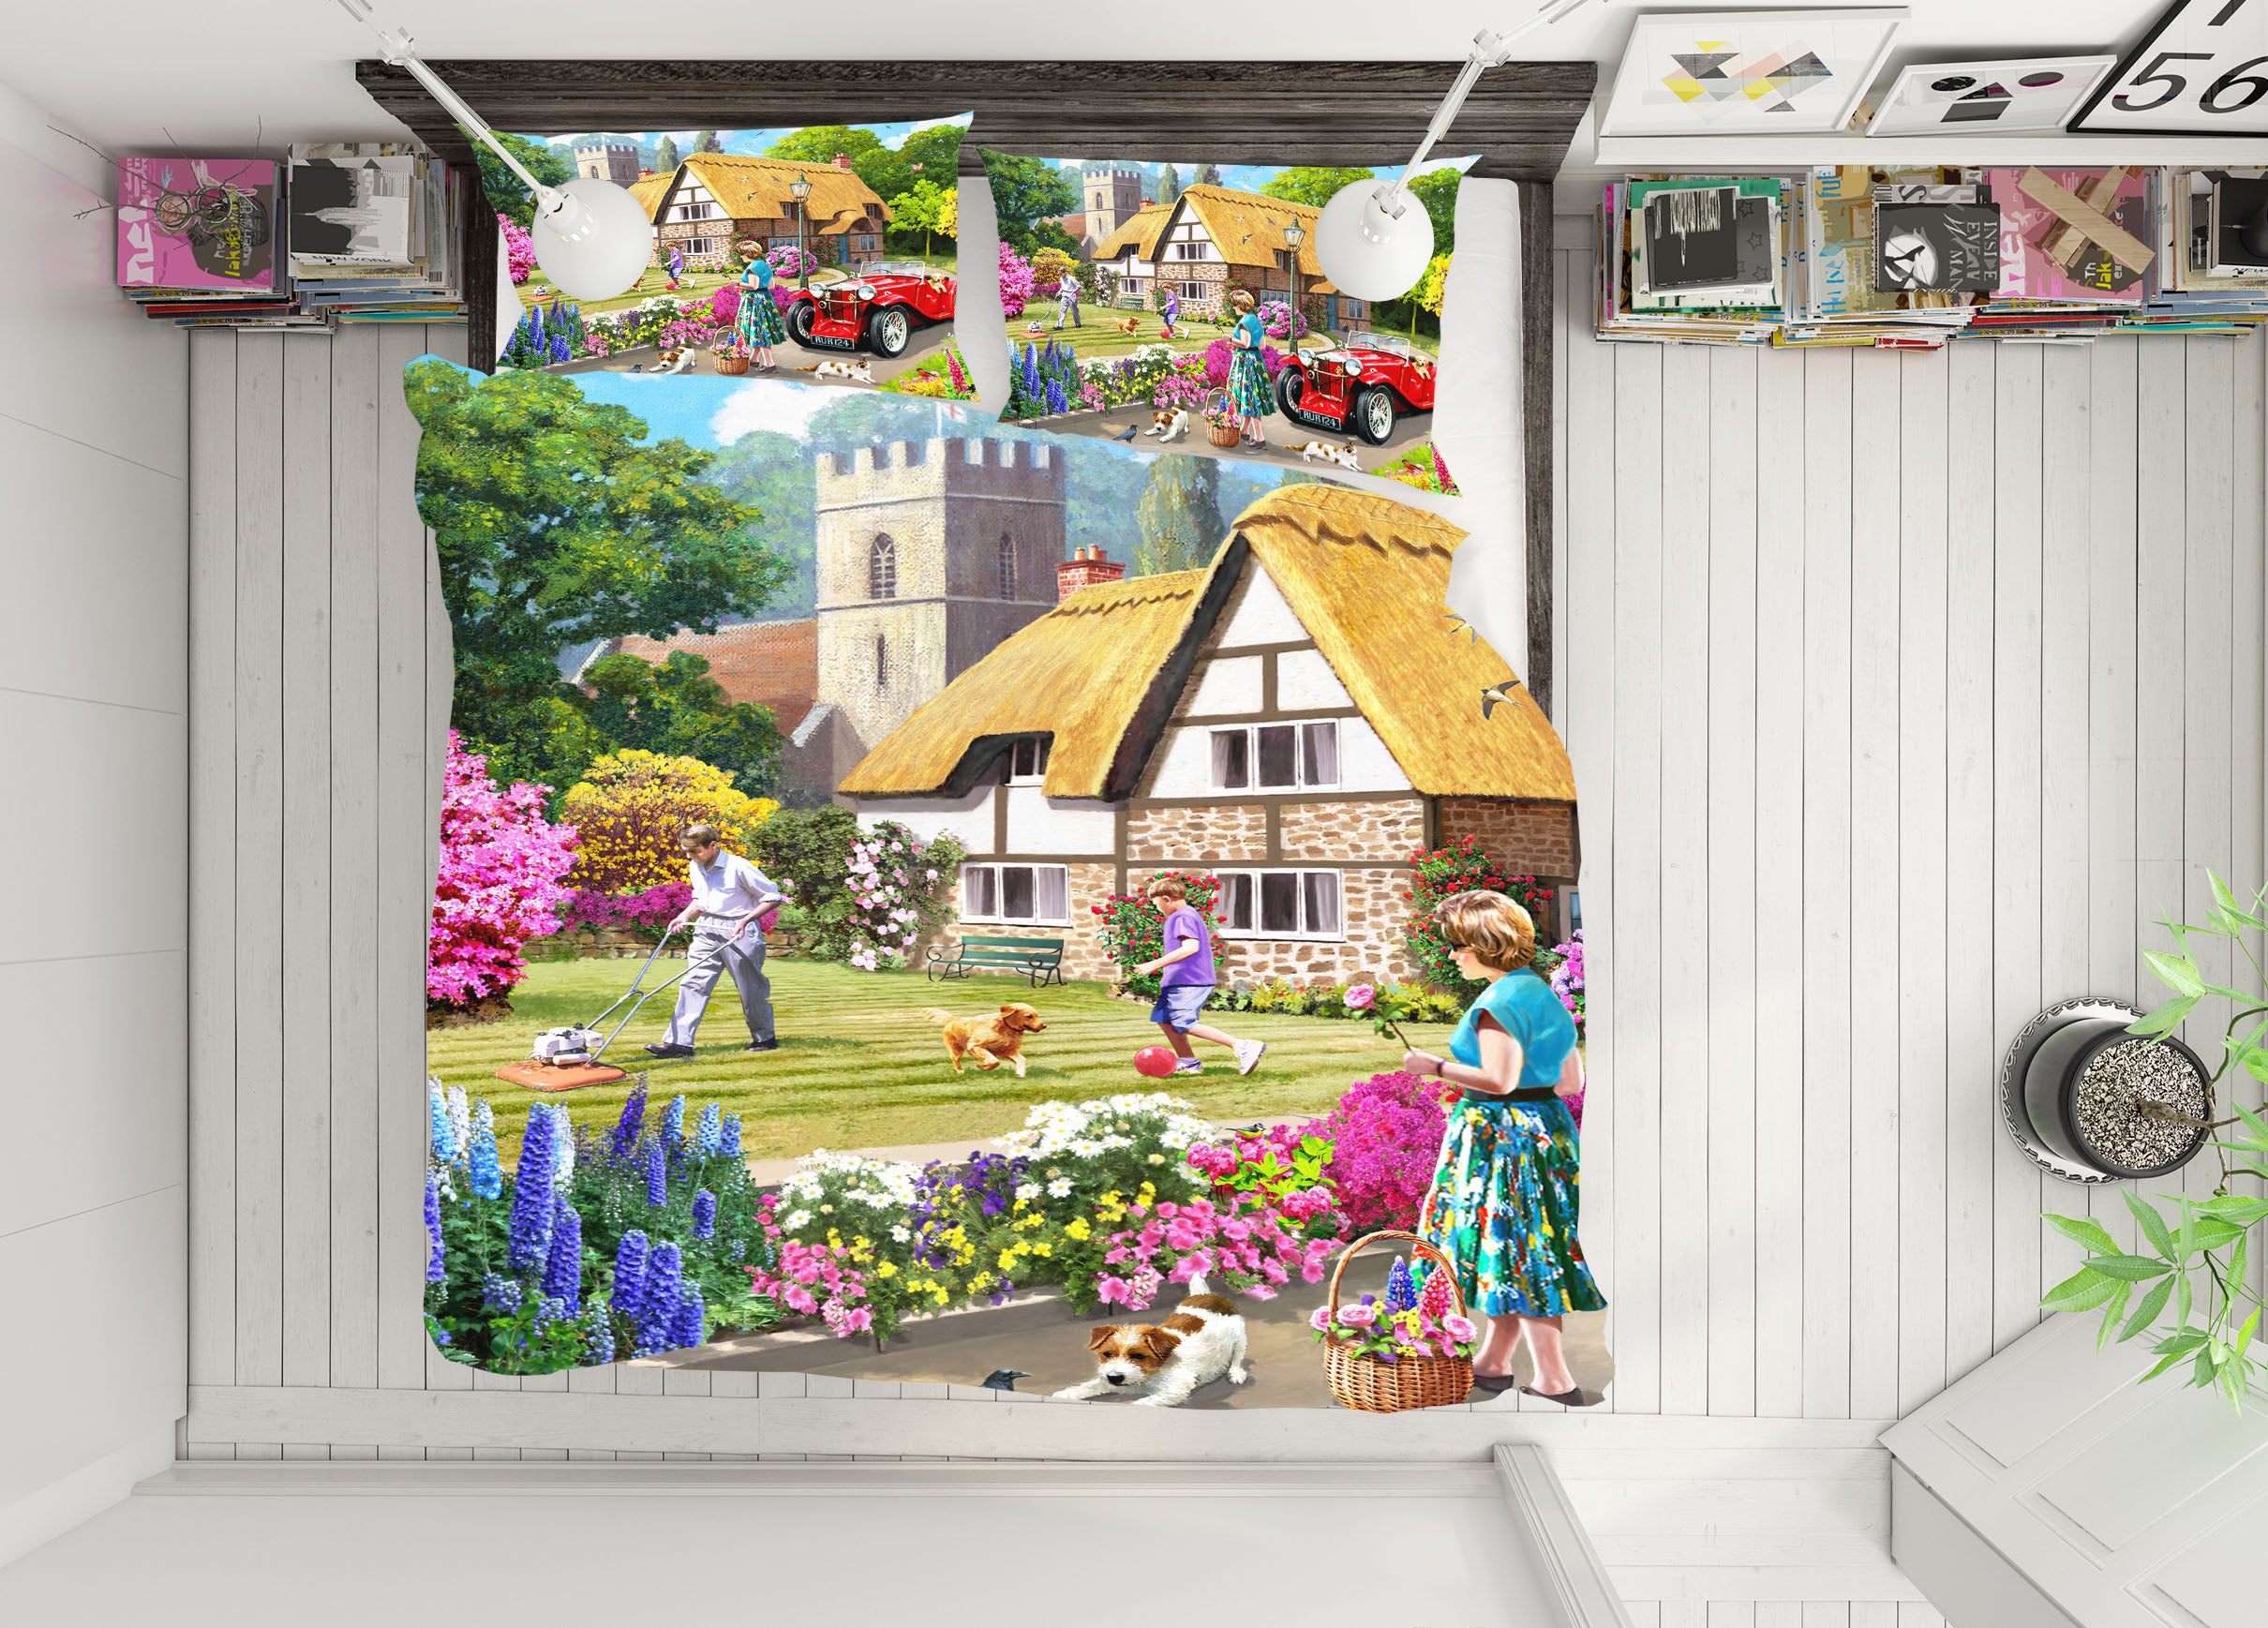 3D House Garden 12516 Kevin Walsh Bedding Bed Pillowcases Quilt